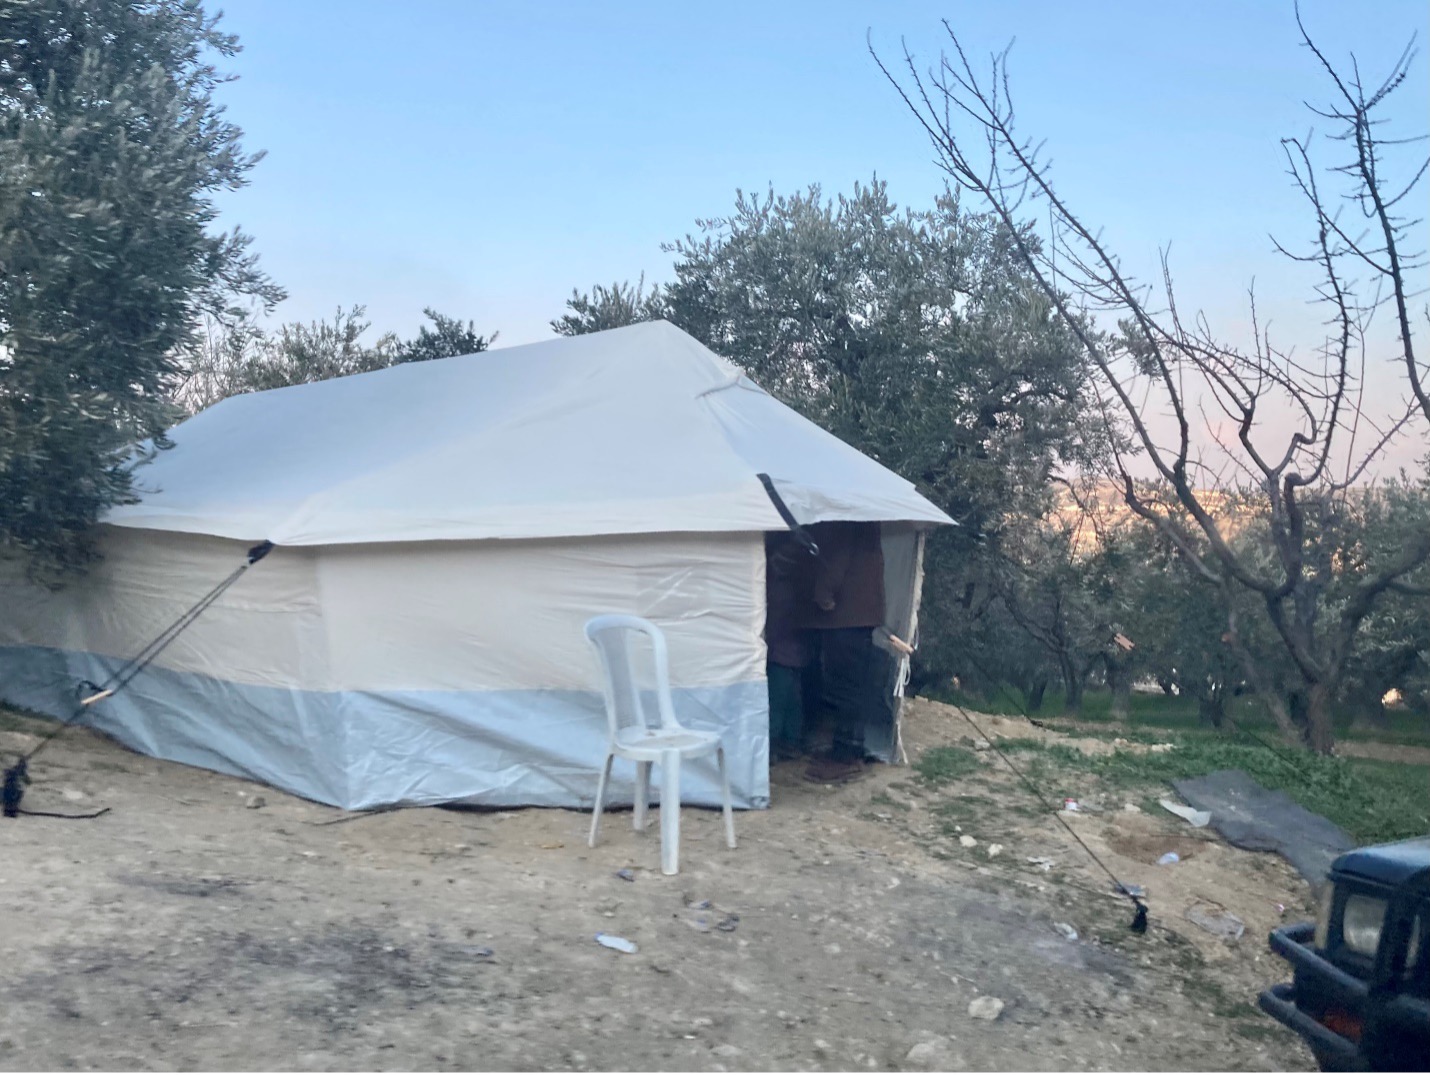 In small villages like Maland tents dot the hillsides as many of the displaced families simply set up in the space around their collapsed houses.